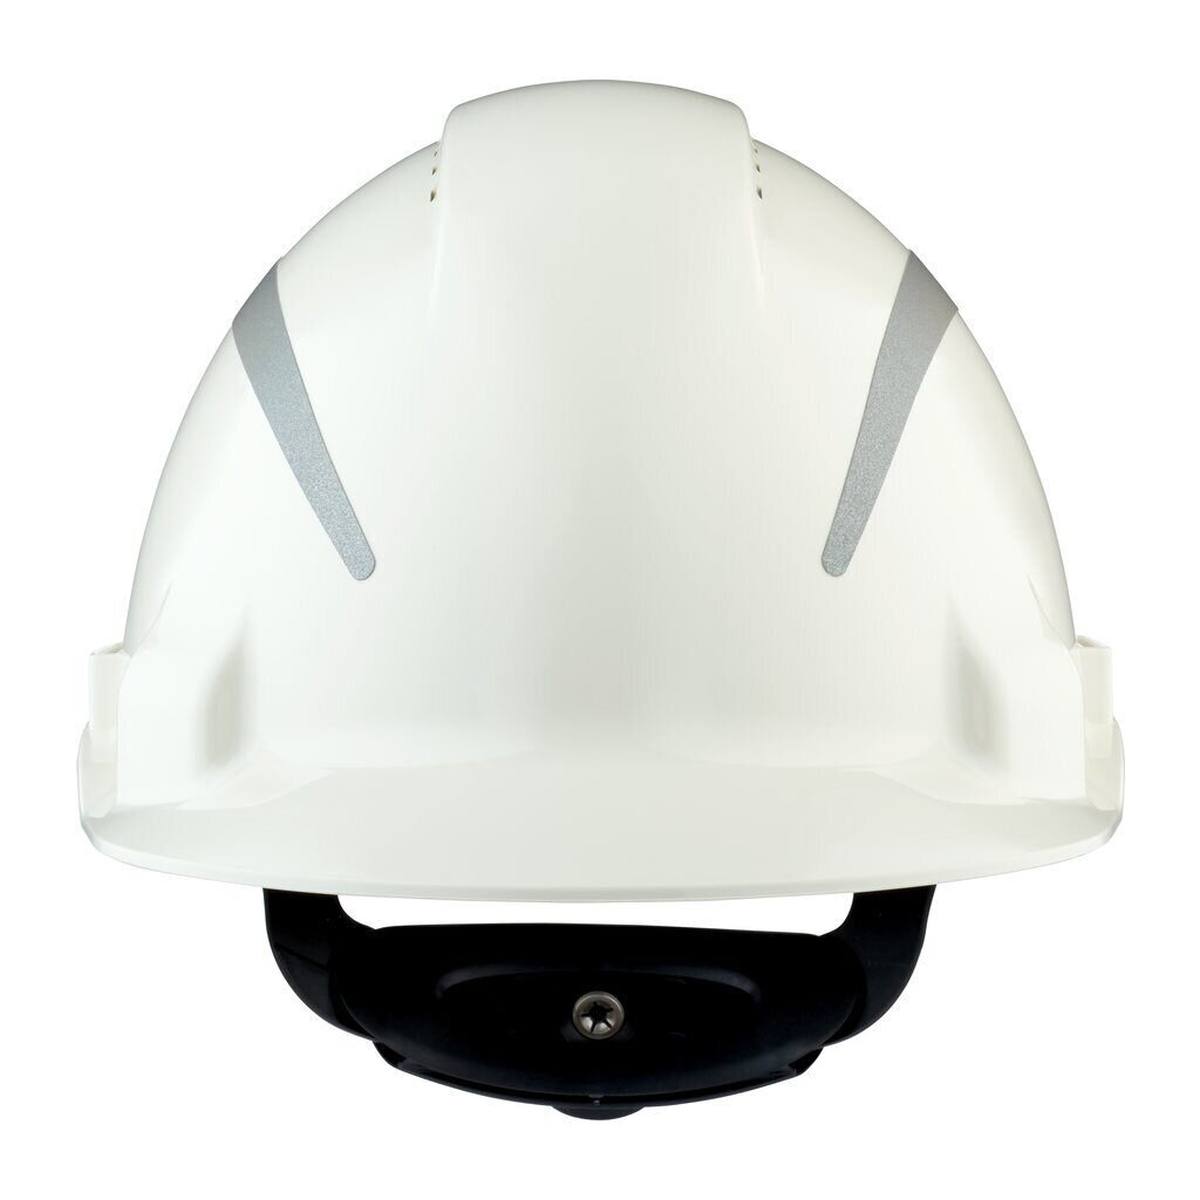 3M G3000 safety helmet with UV indicator, white, ABS, ventilated ratchet fastener, plastic sweatband, reflective sticker